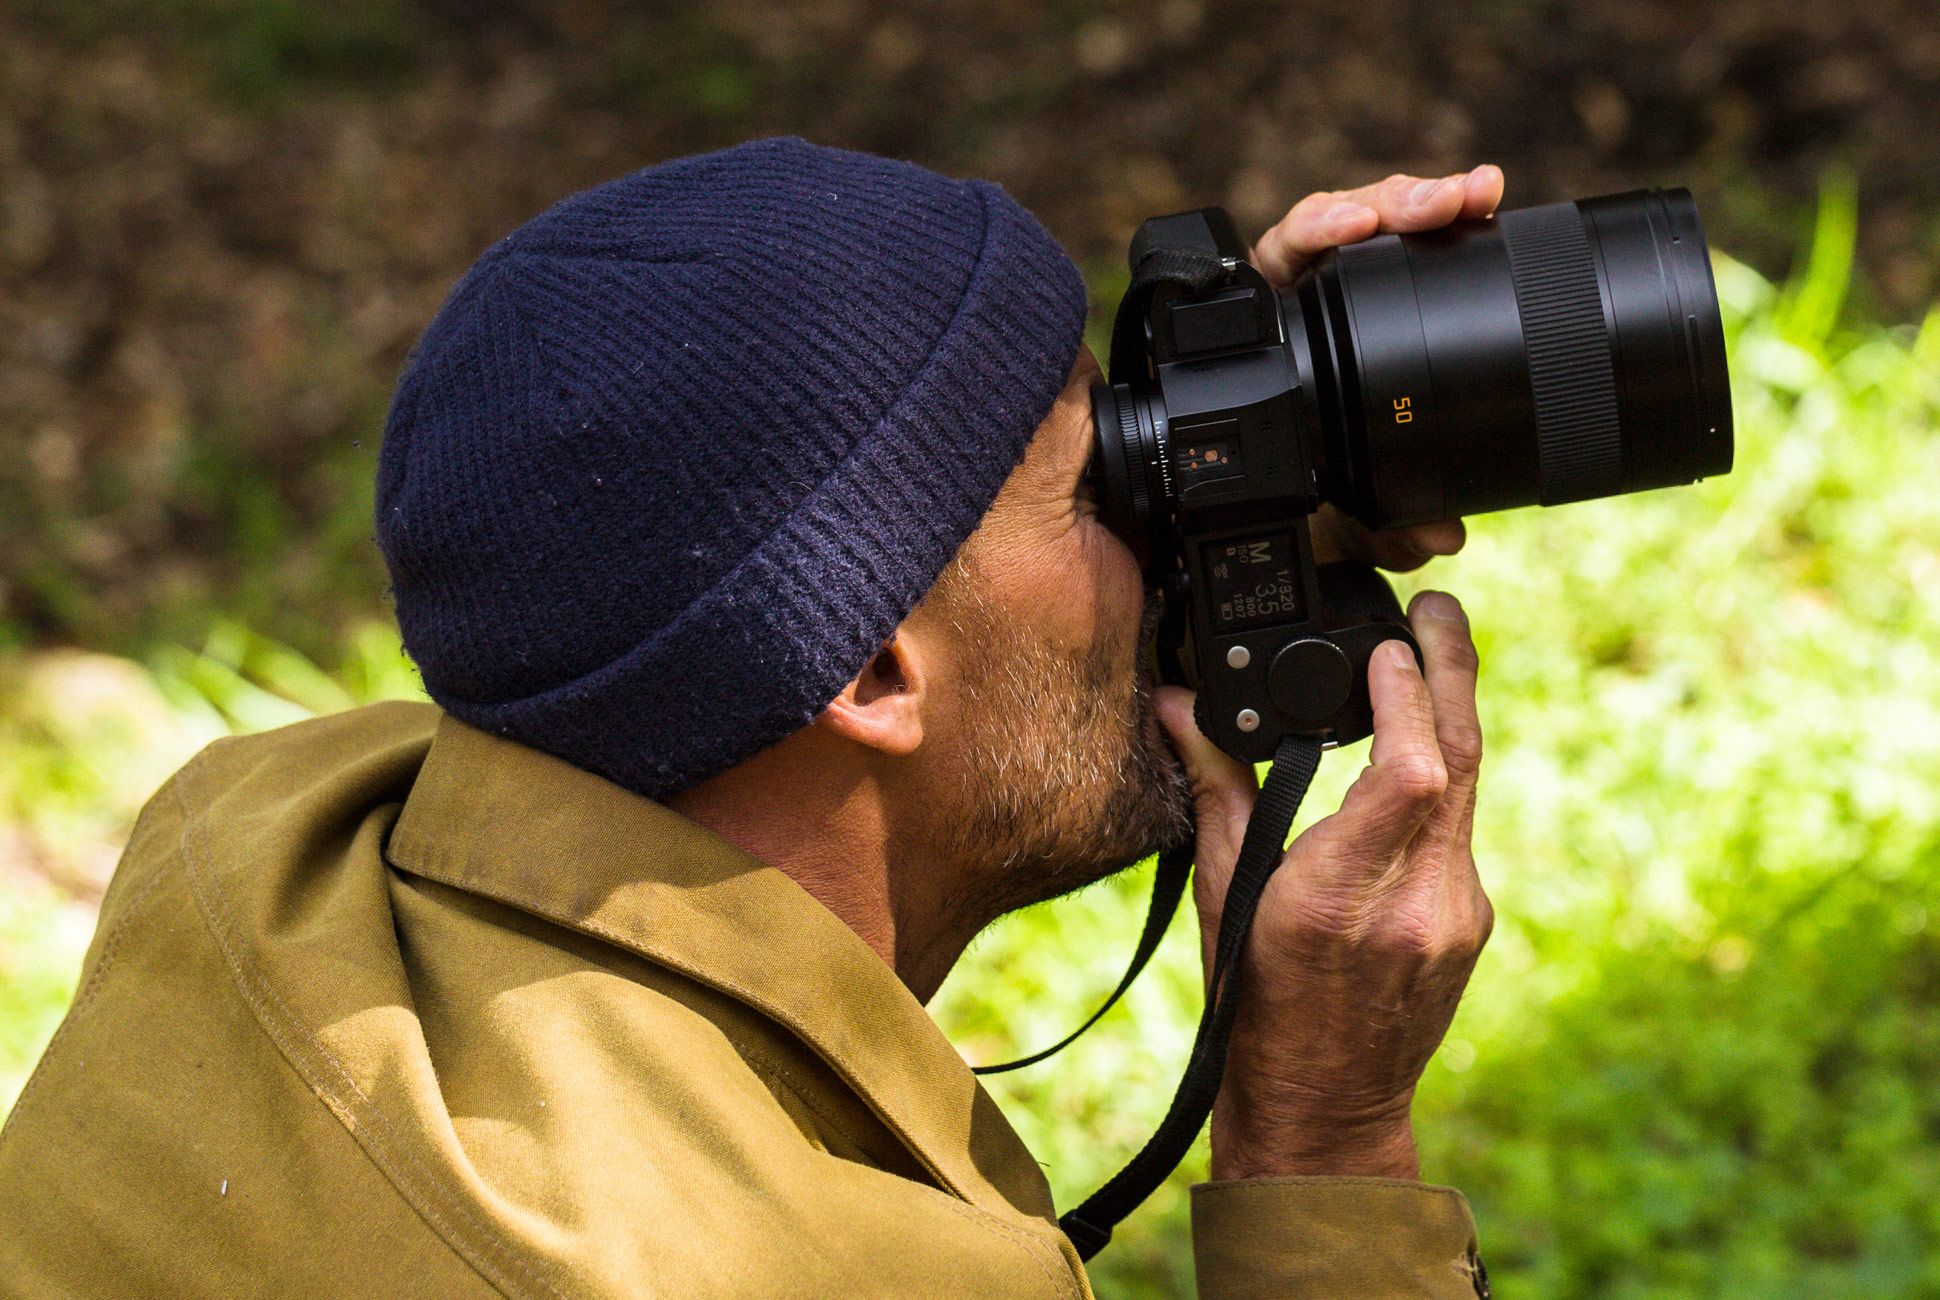 Best Outdoor Photography Accessories, According to the Pros